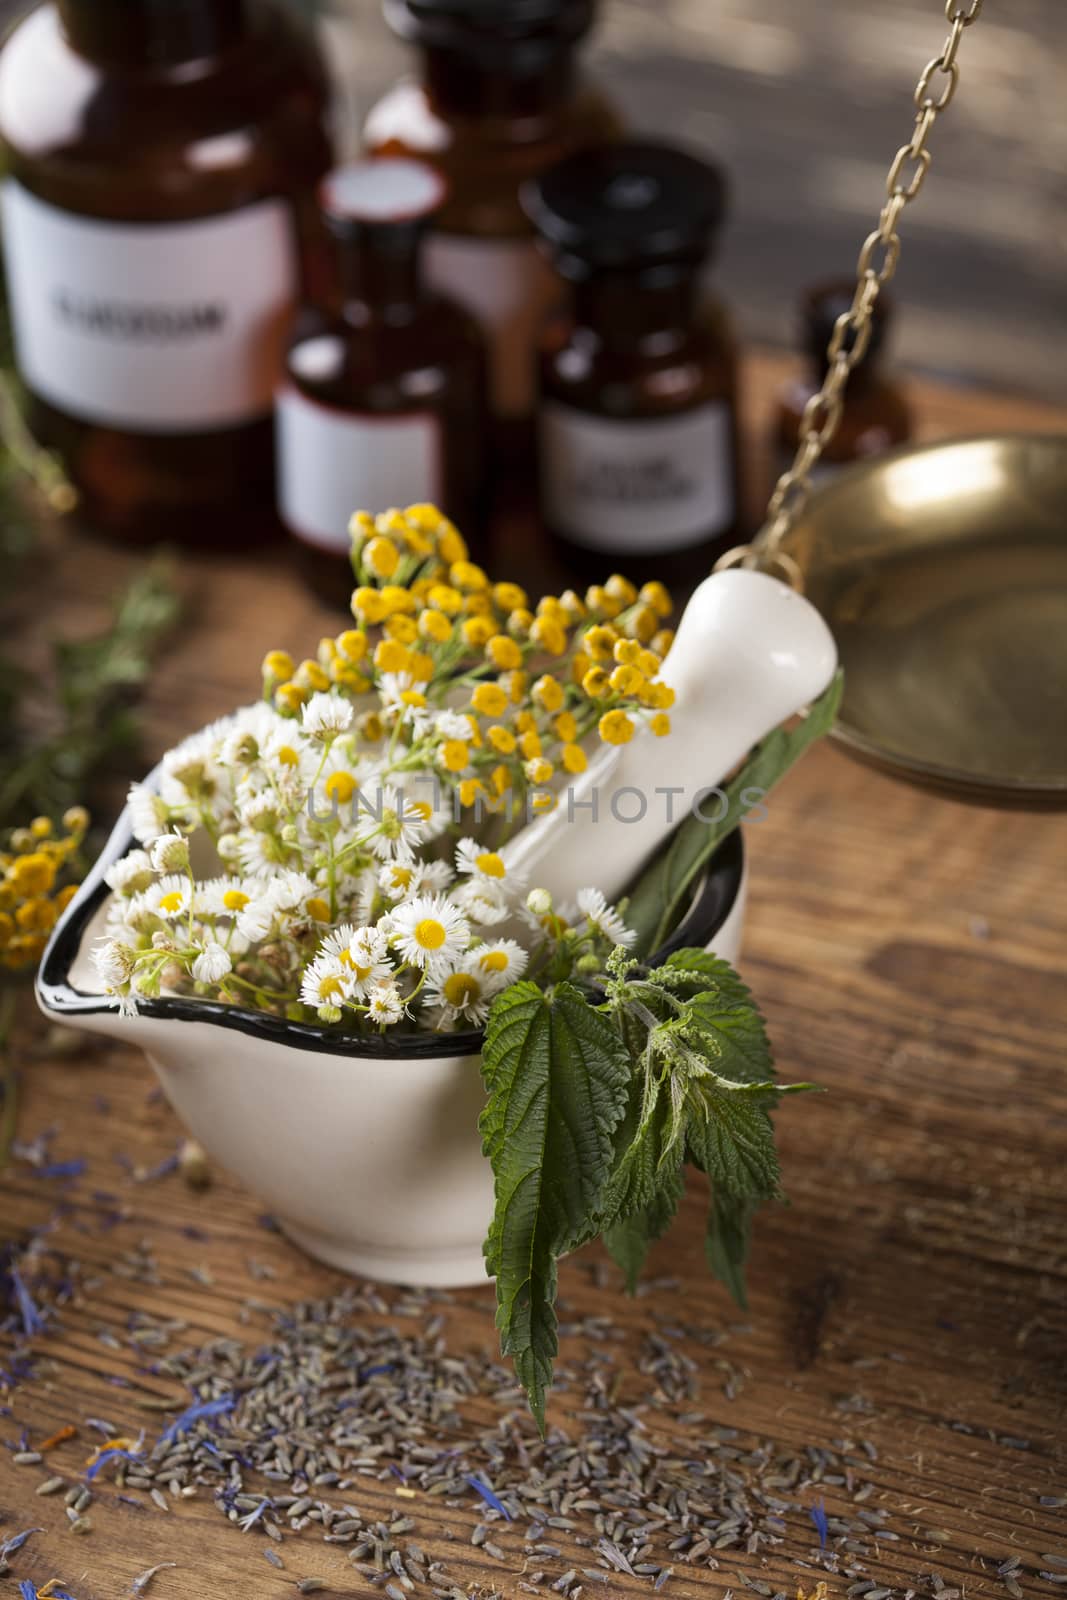 Herbs, berries and flowers with mortar, on wooden table backgrou by JanPietruszka